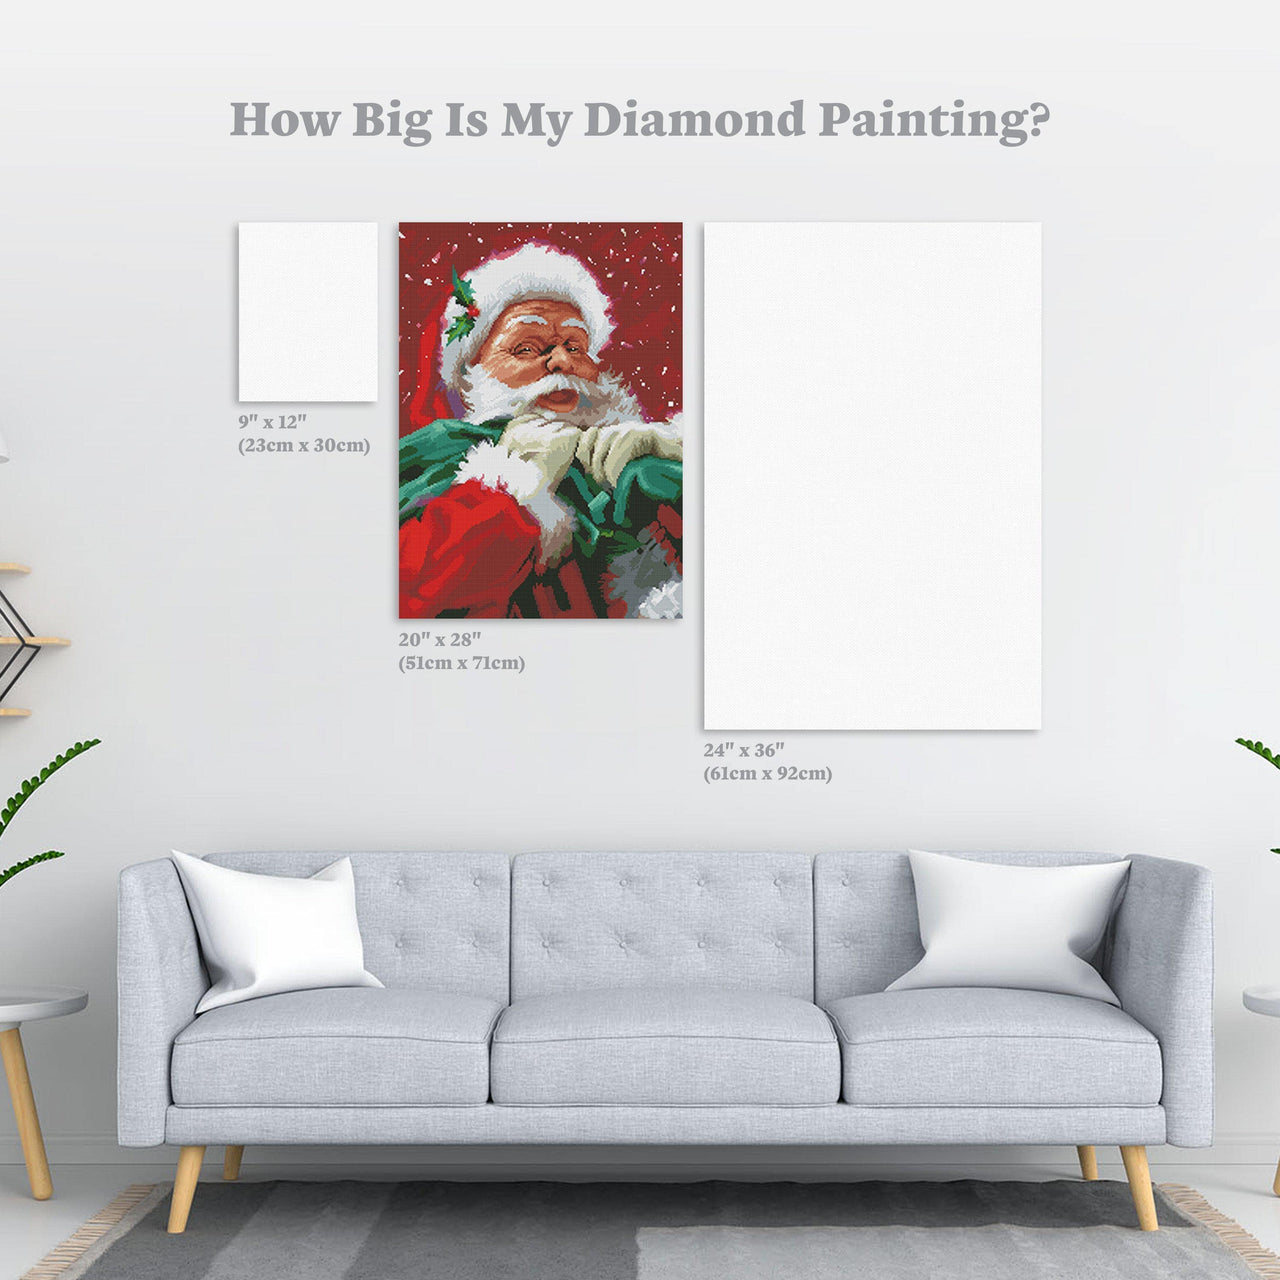 Diamond Painting Santa Face 20" x 28″ (51cm x 71cm) / Round With 40 Colors Including 1 AB / 45,362